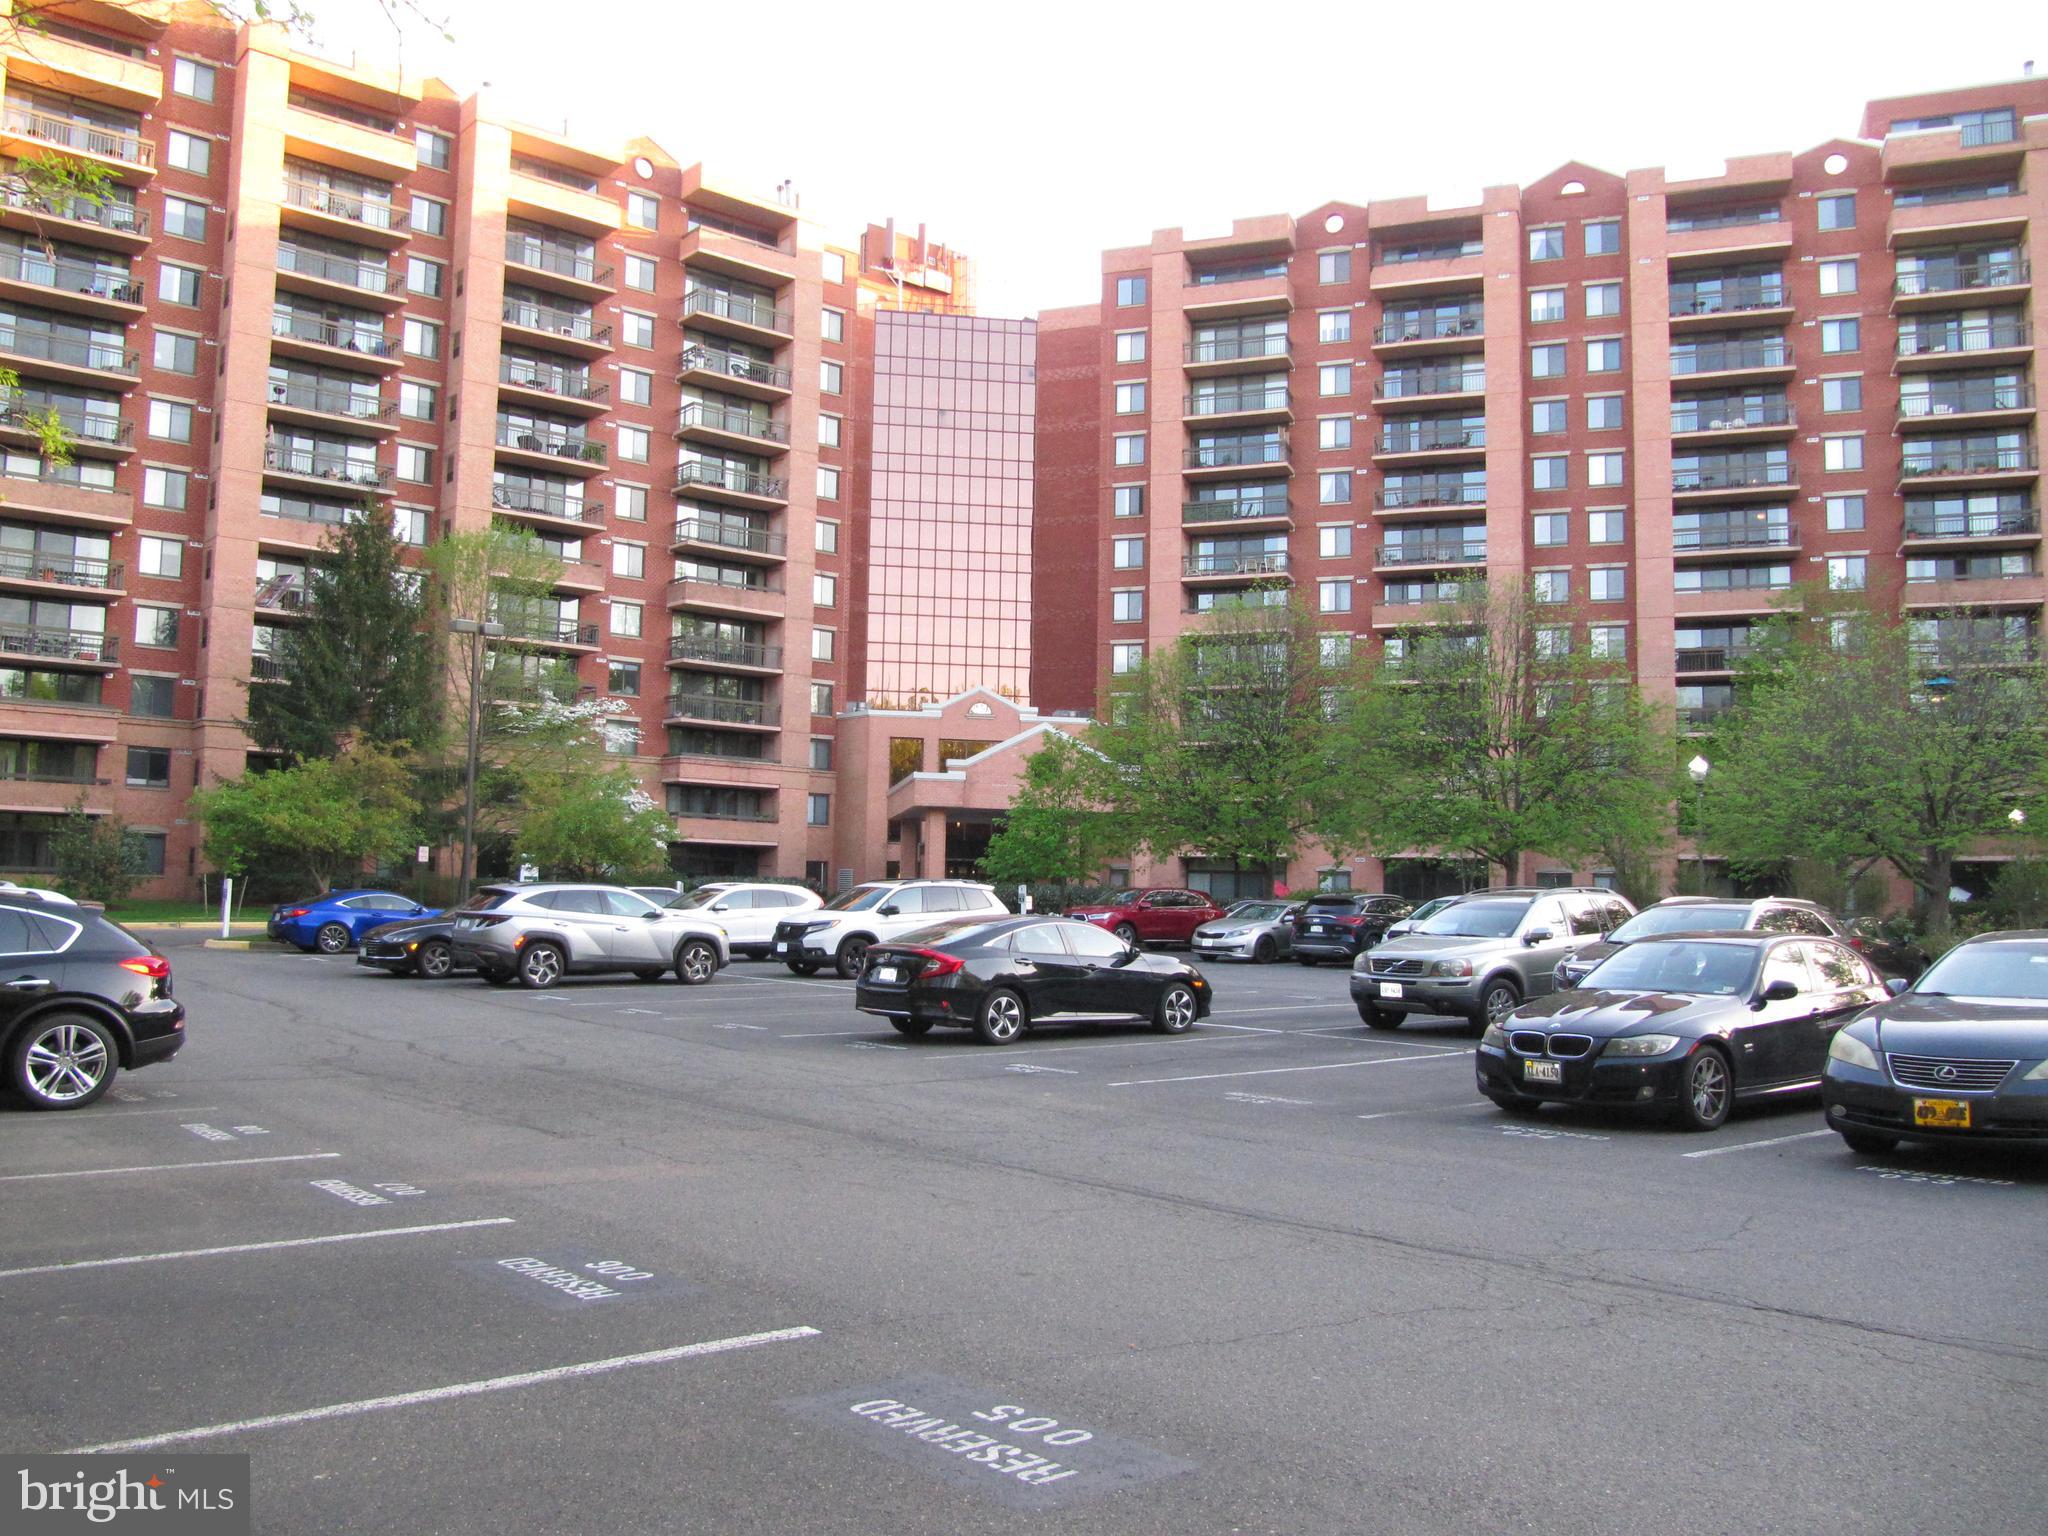 a view of a cars parked in front of a building